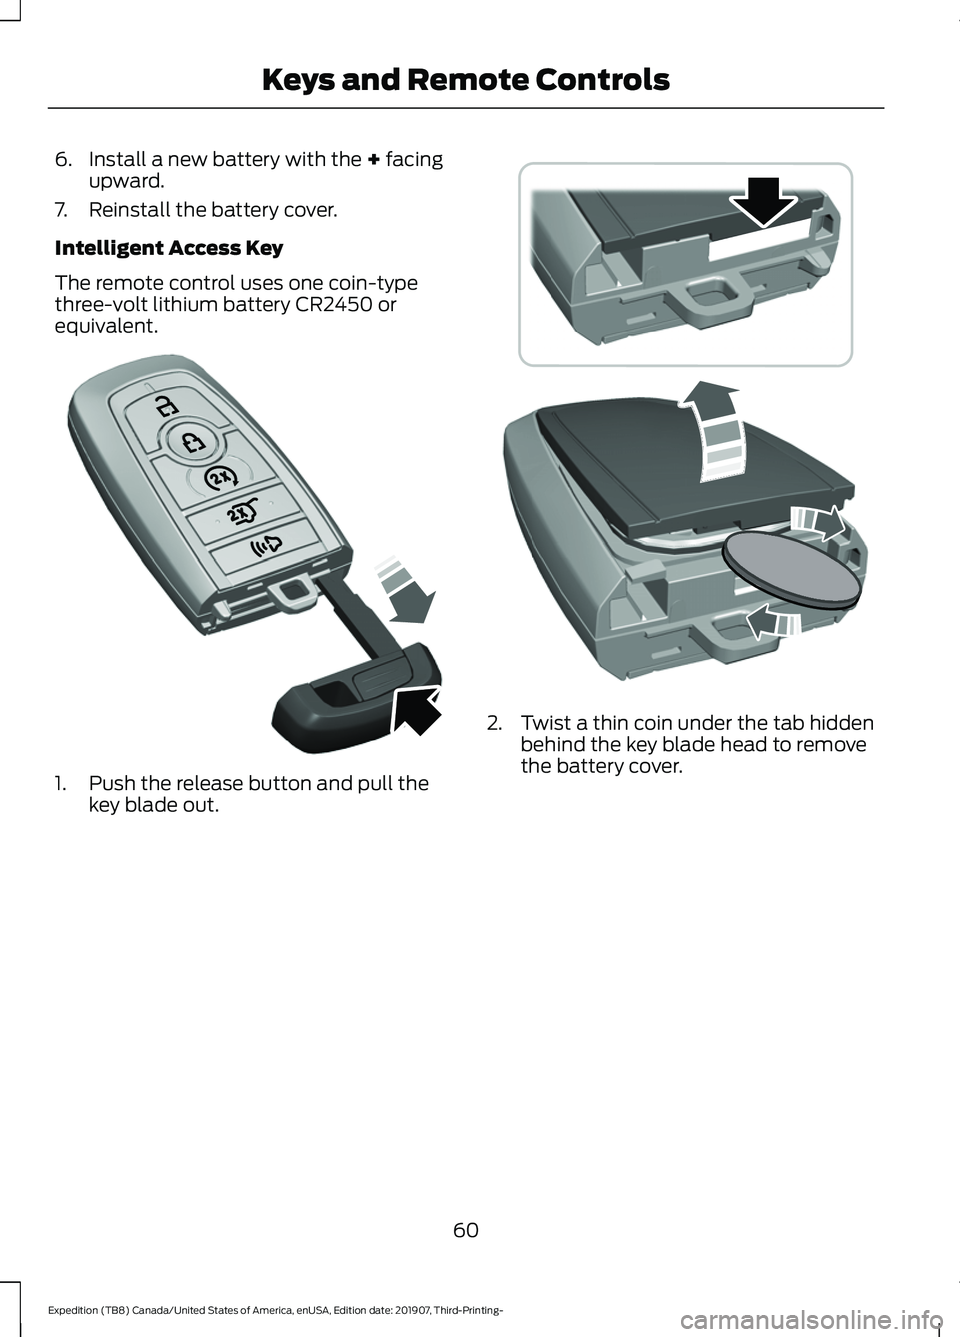 FORD EXPEDITION 2020  Owners Manual 6. Install a new battery with the + facing
upward.
7. Reinstall the battery cover.
Intelligent Access Key
The remote control uses one coin-type
three-volt lithium battery CR2450 or
equivalent. 1. Push